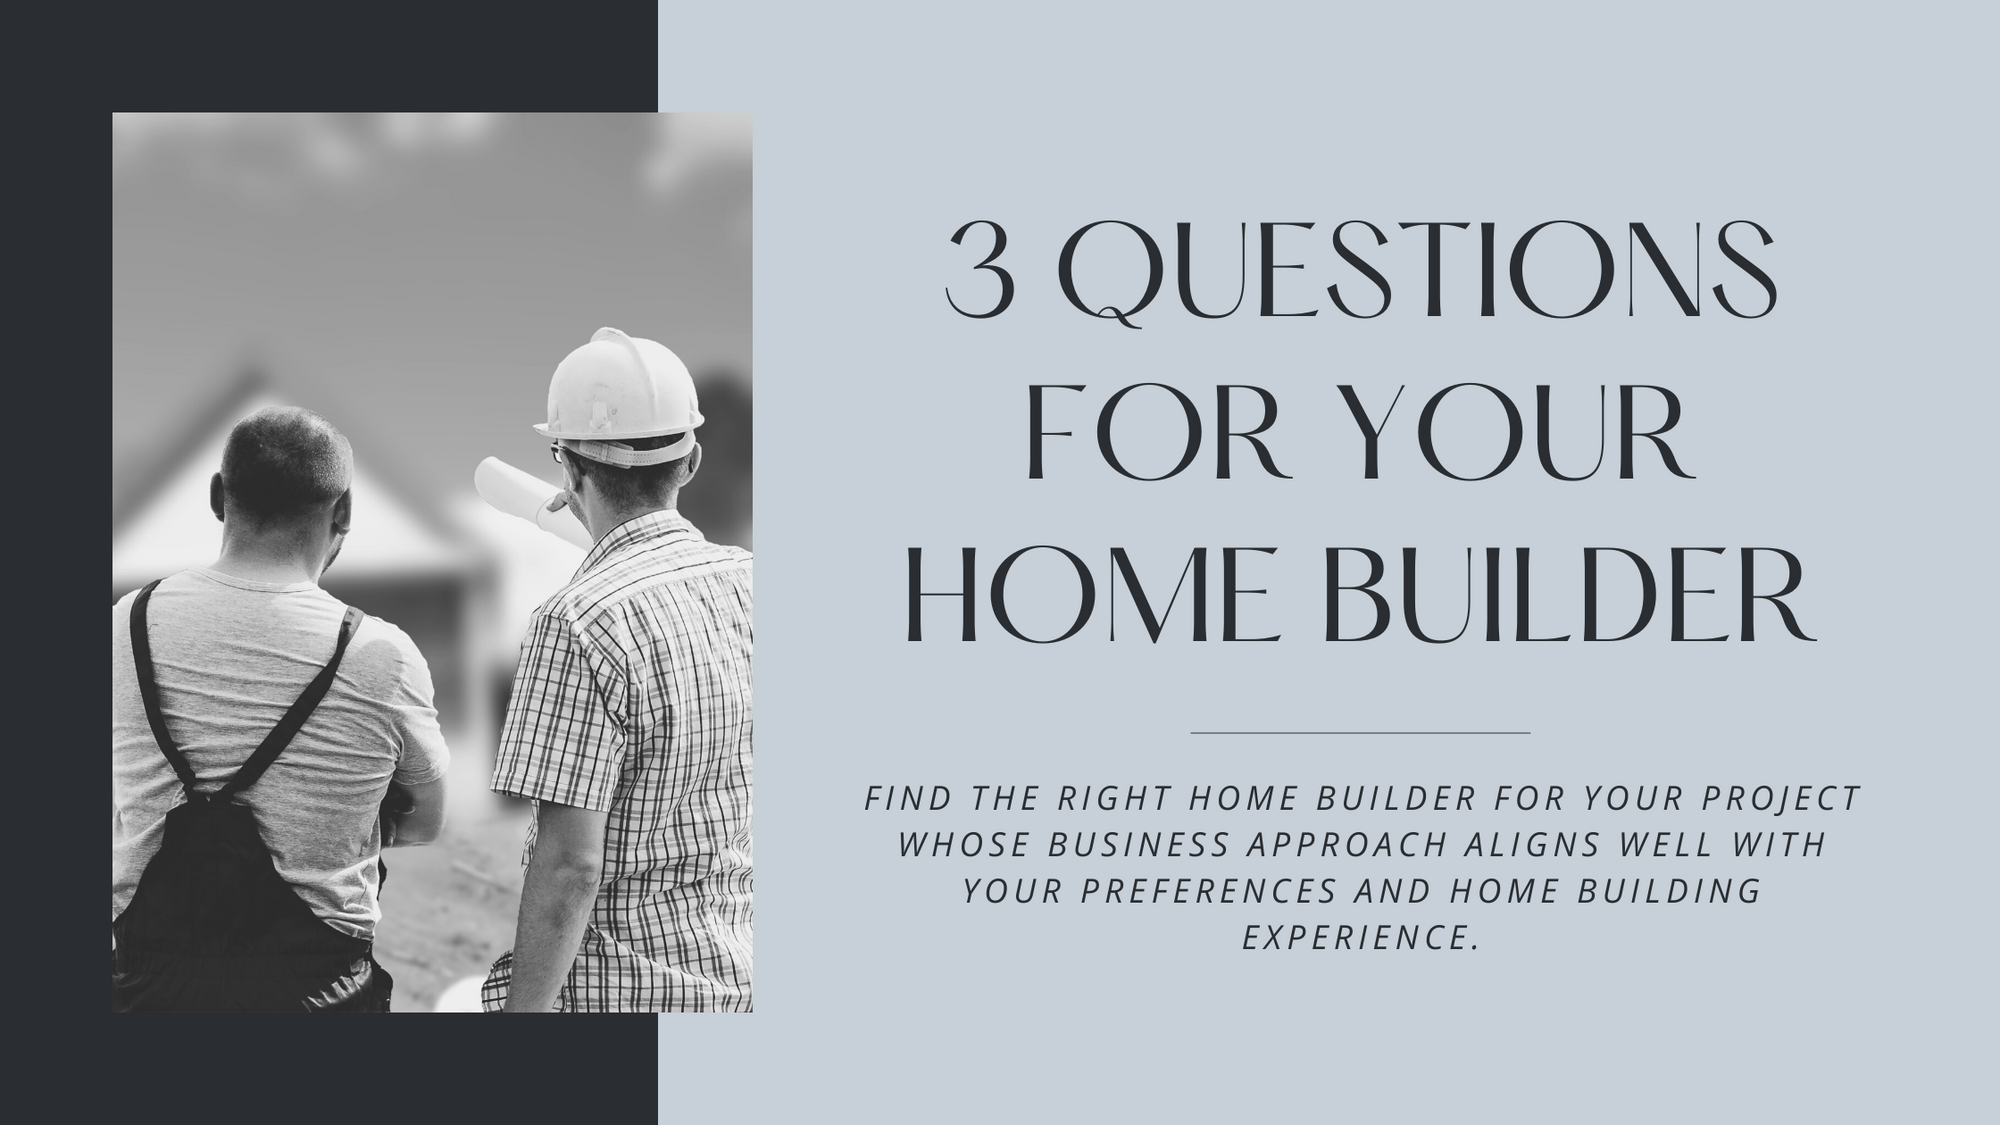 3 Questions to Ask When Choosing the Right Builder